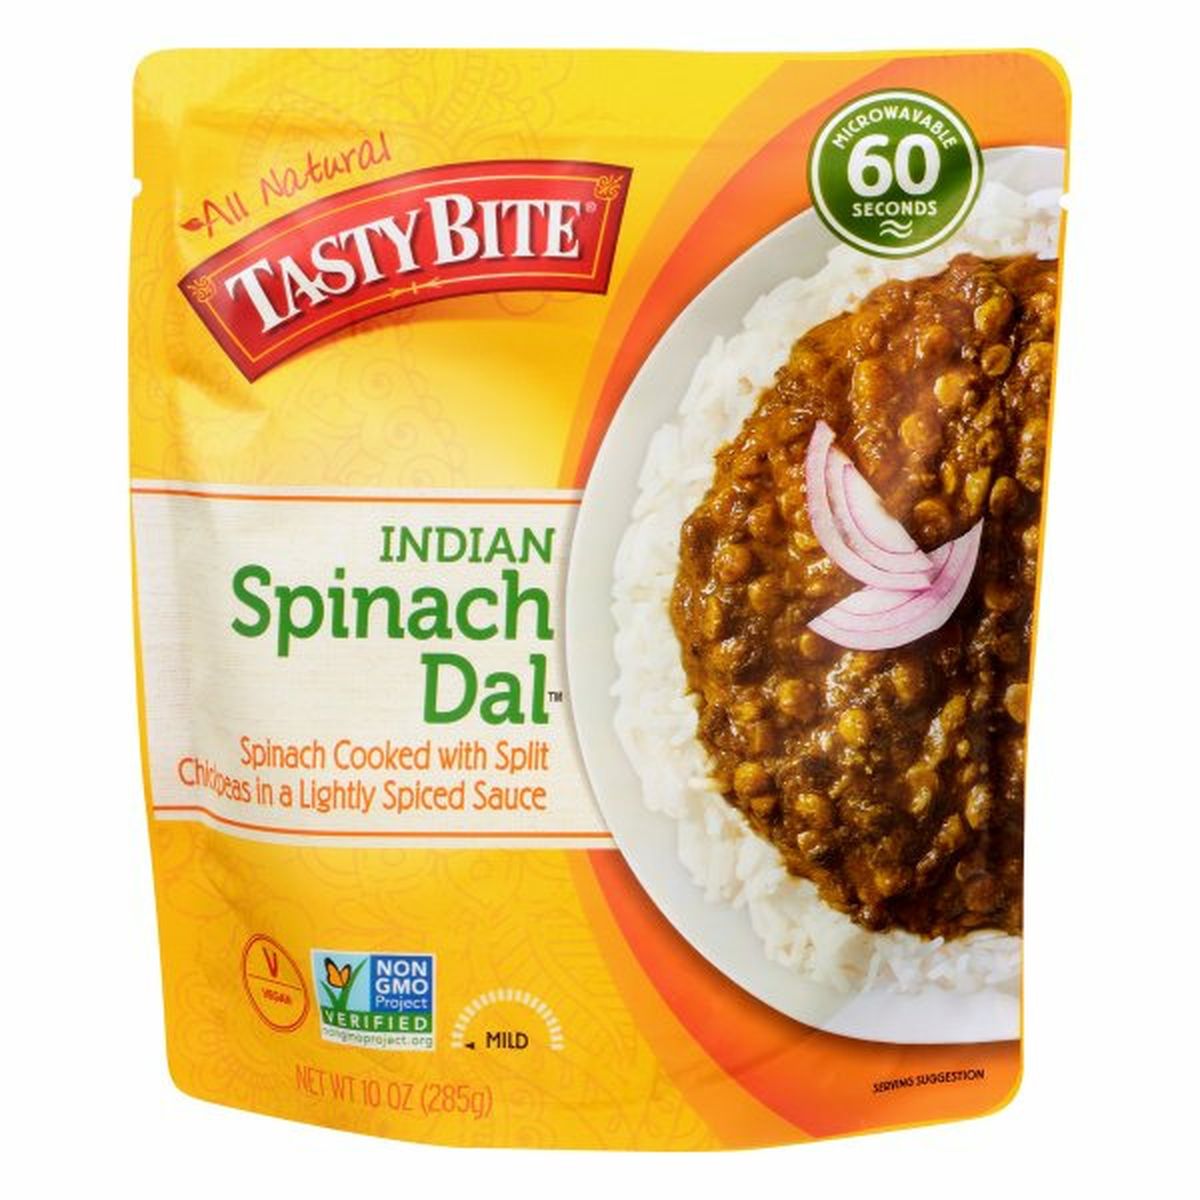 Calories in Tasty Bite Spinach Dal, Indian, Mild